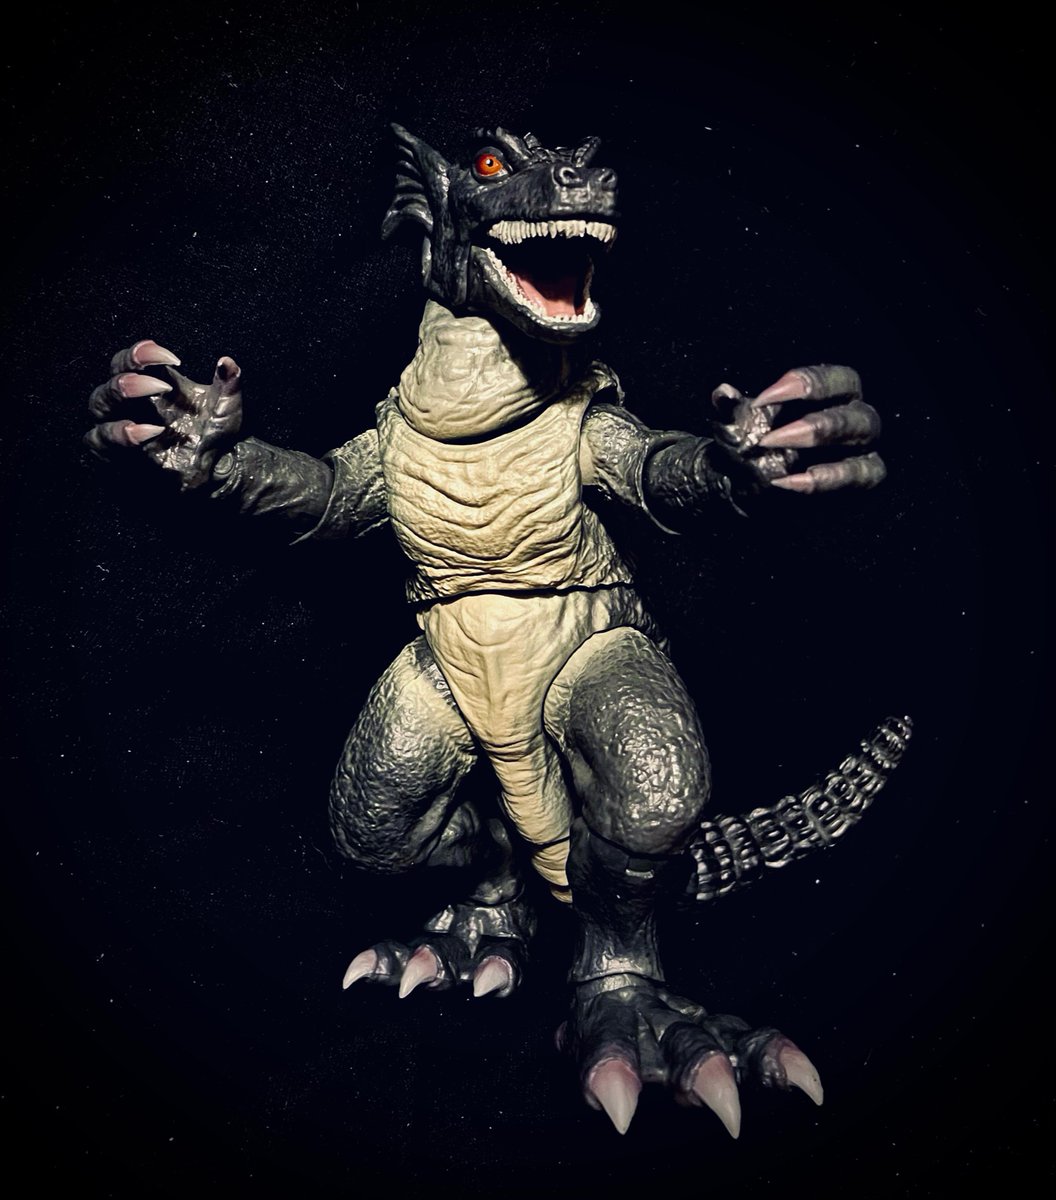 GORGO’S IN THE HOUSE! I couldn’t be more grateful to (and happy for) @Titanicreations for tackling this incredible project, and the results speak for themselves. From the packaging and accessories to Gorgo herself, it all came together perfectly. What a truly fantastic figure!